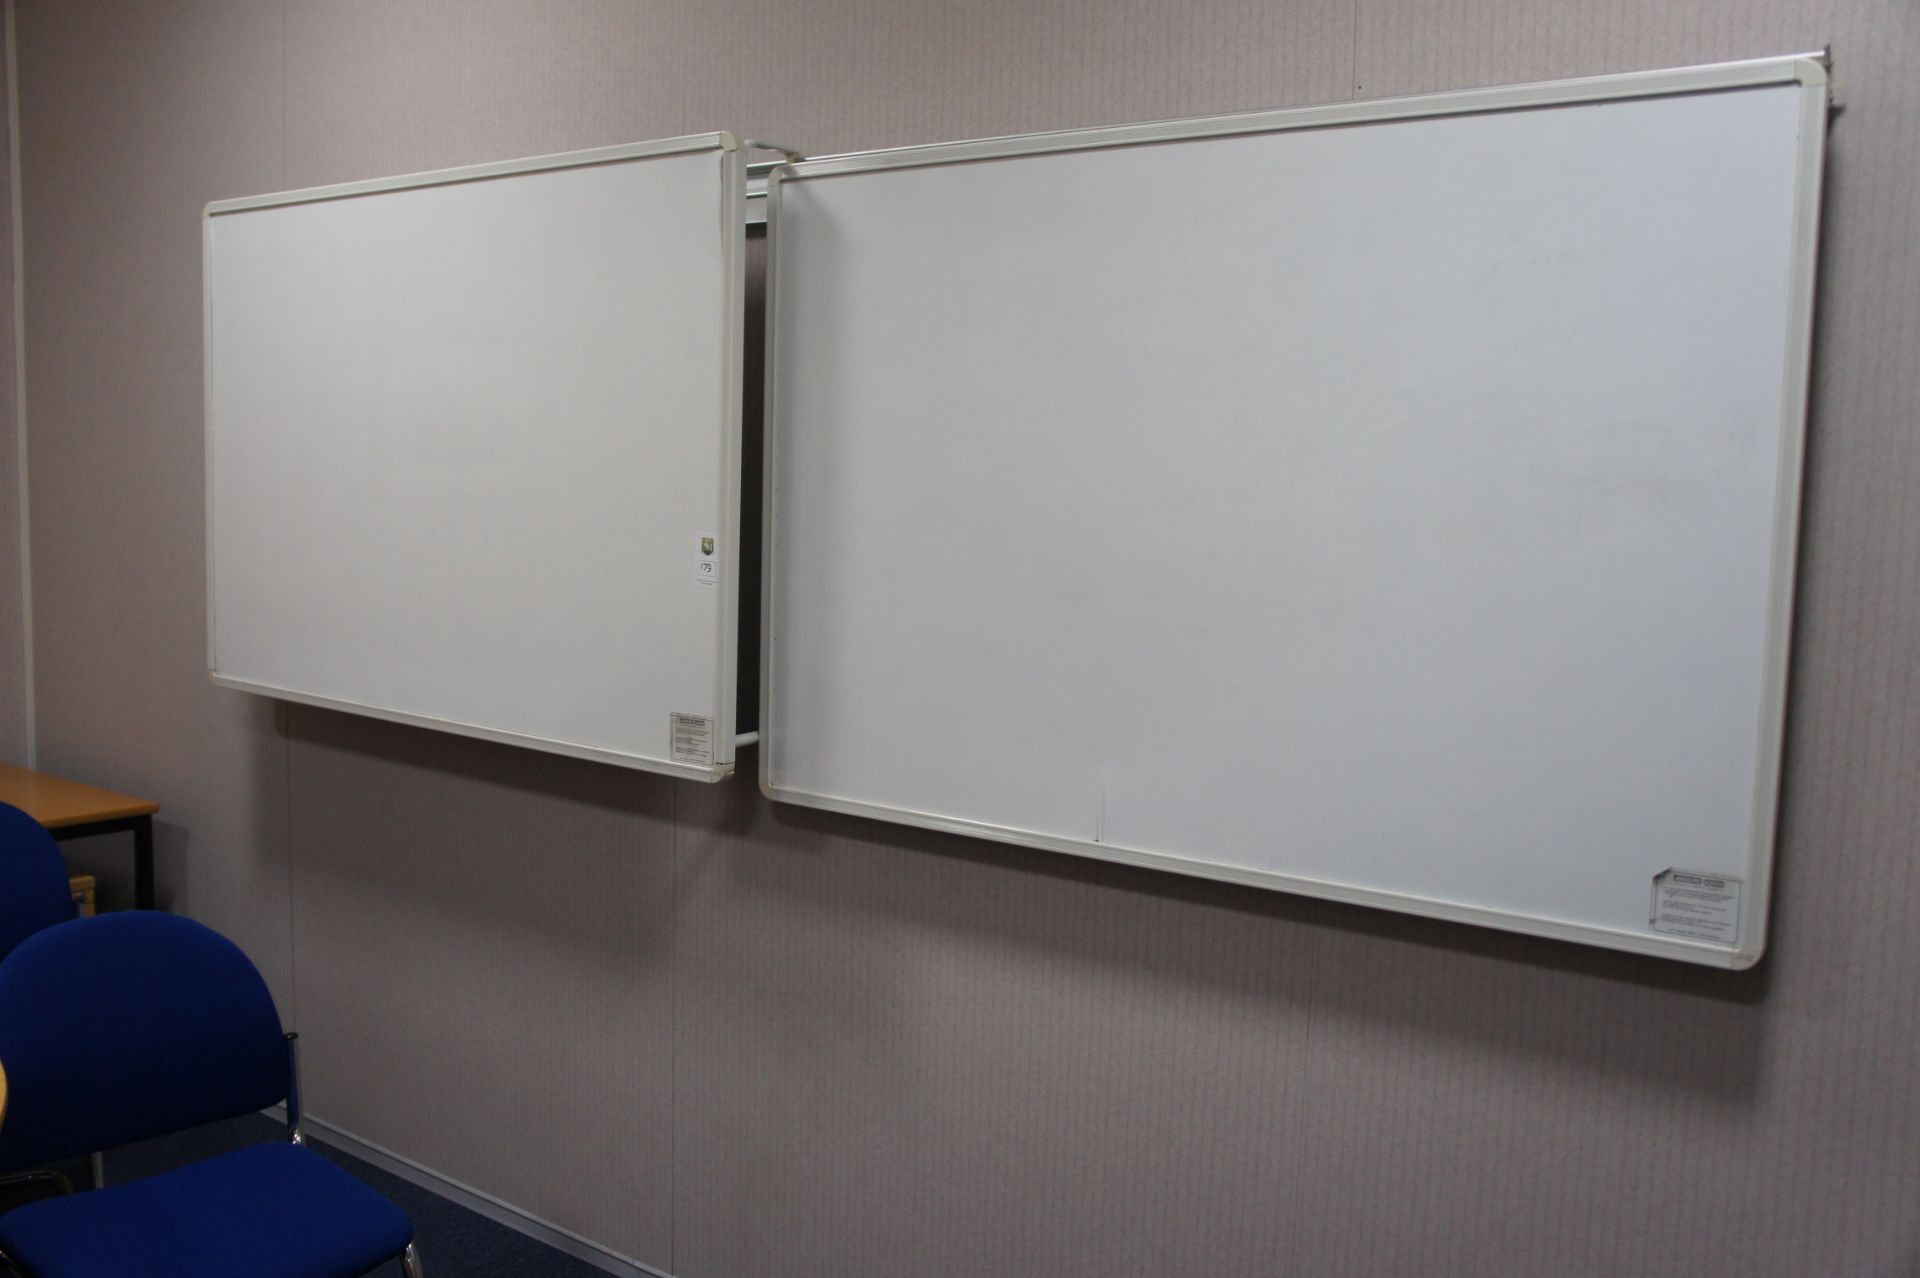 Anders & Kern rail mounted dry wipe boards 2 x 1500mm x 500mm - Image 2 of 2